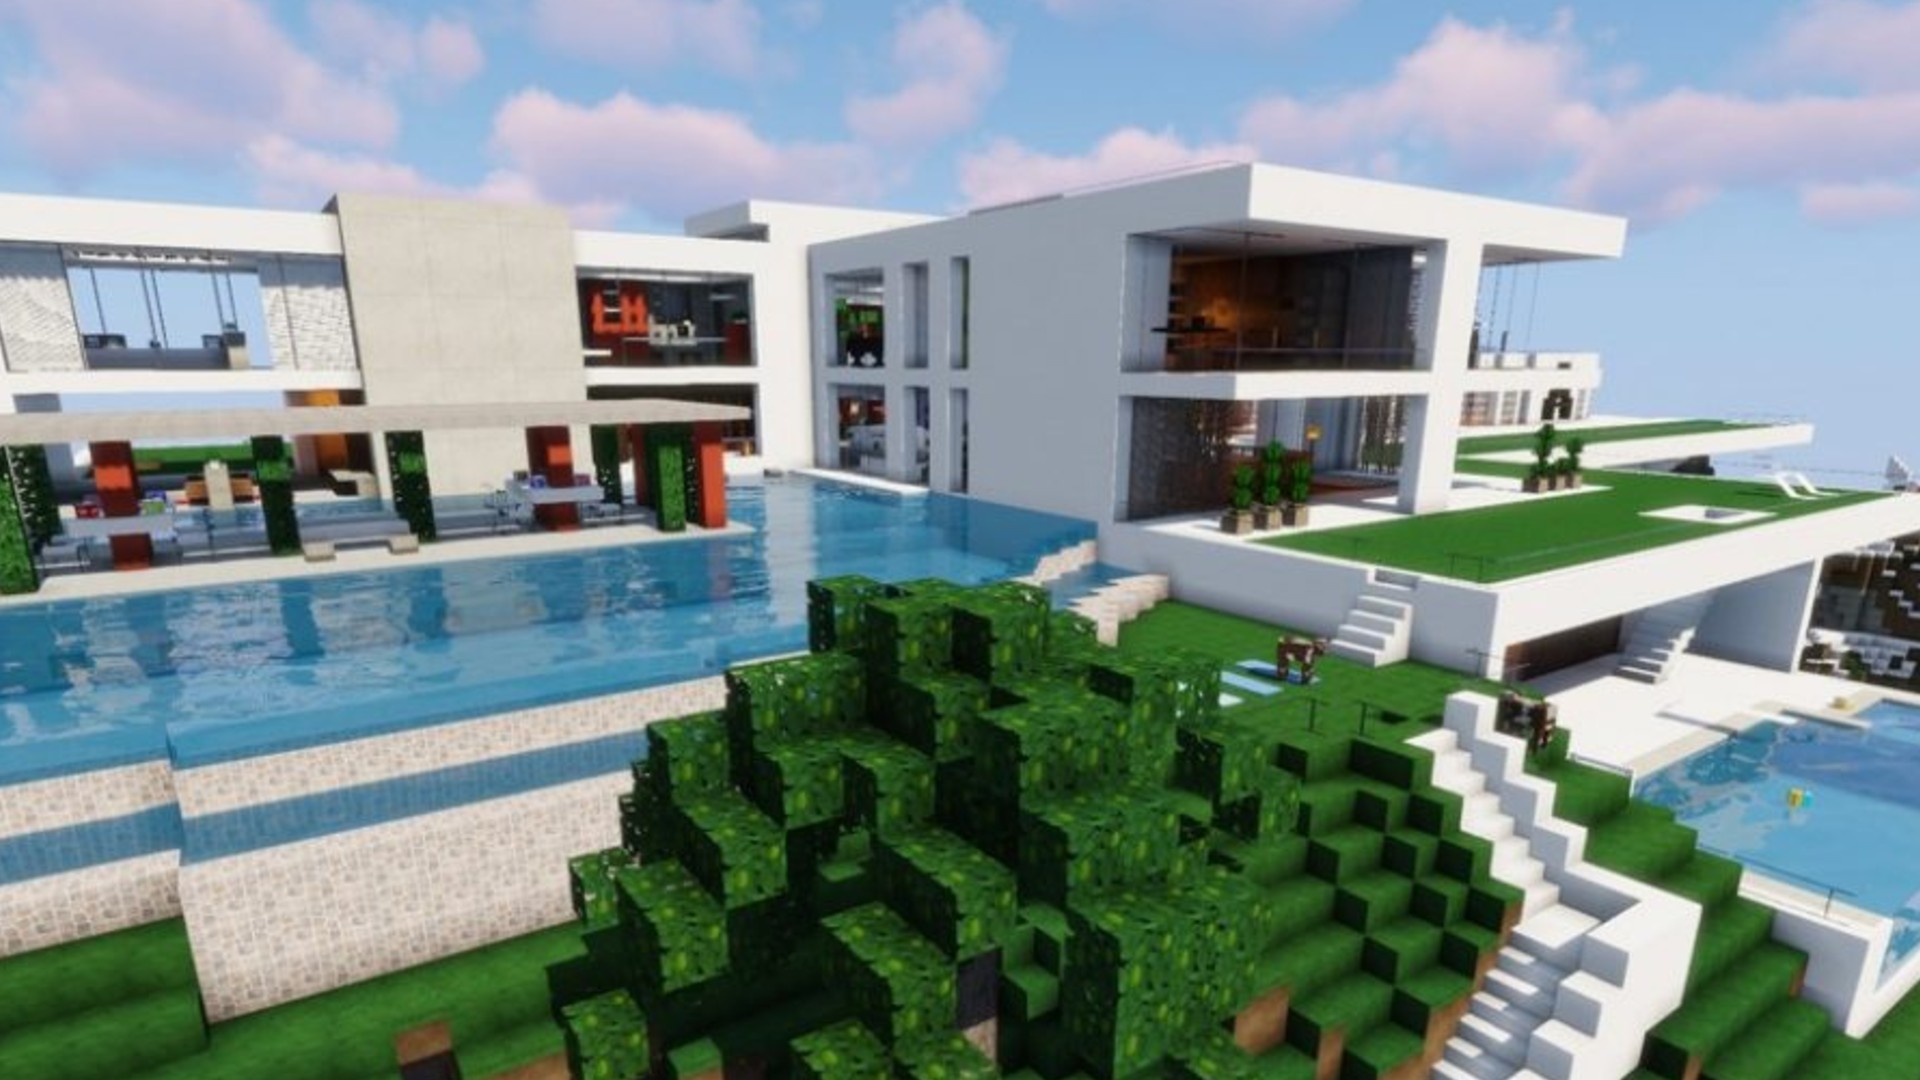 Cool Minecraft Houses Ideas For Your